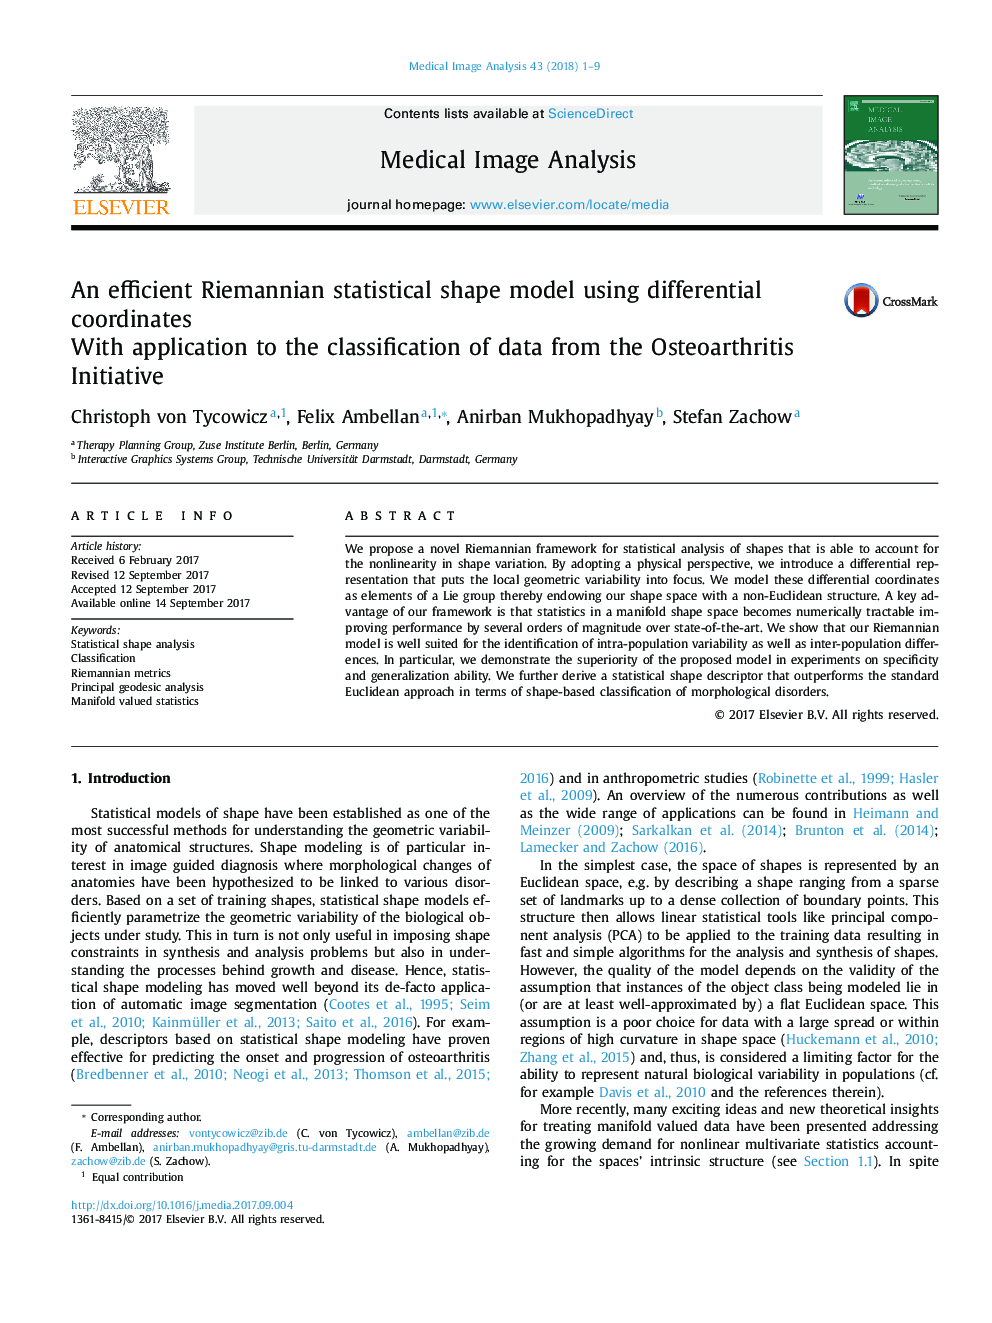 An efficient Riemannian statistical shape model using differential coordinates: With application to the classification of data from the Osteoarthritis Initiative